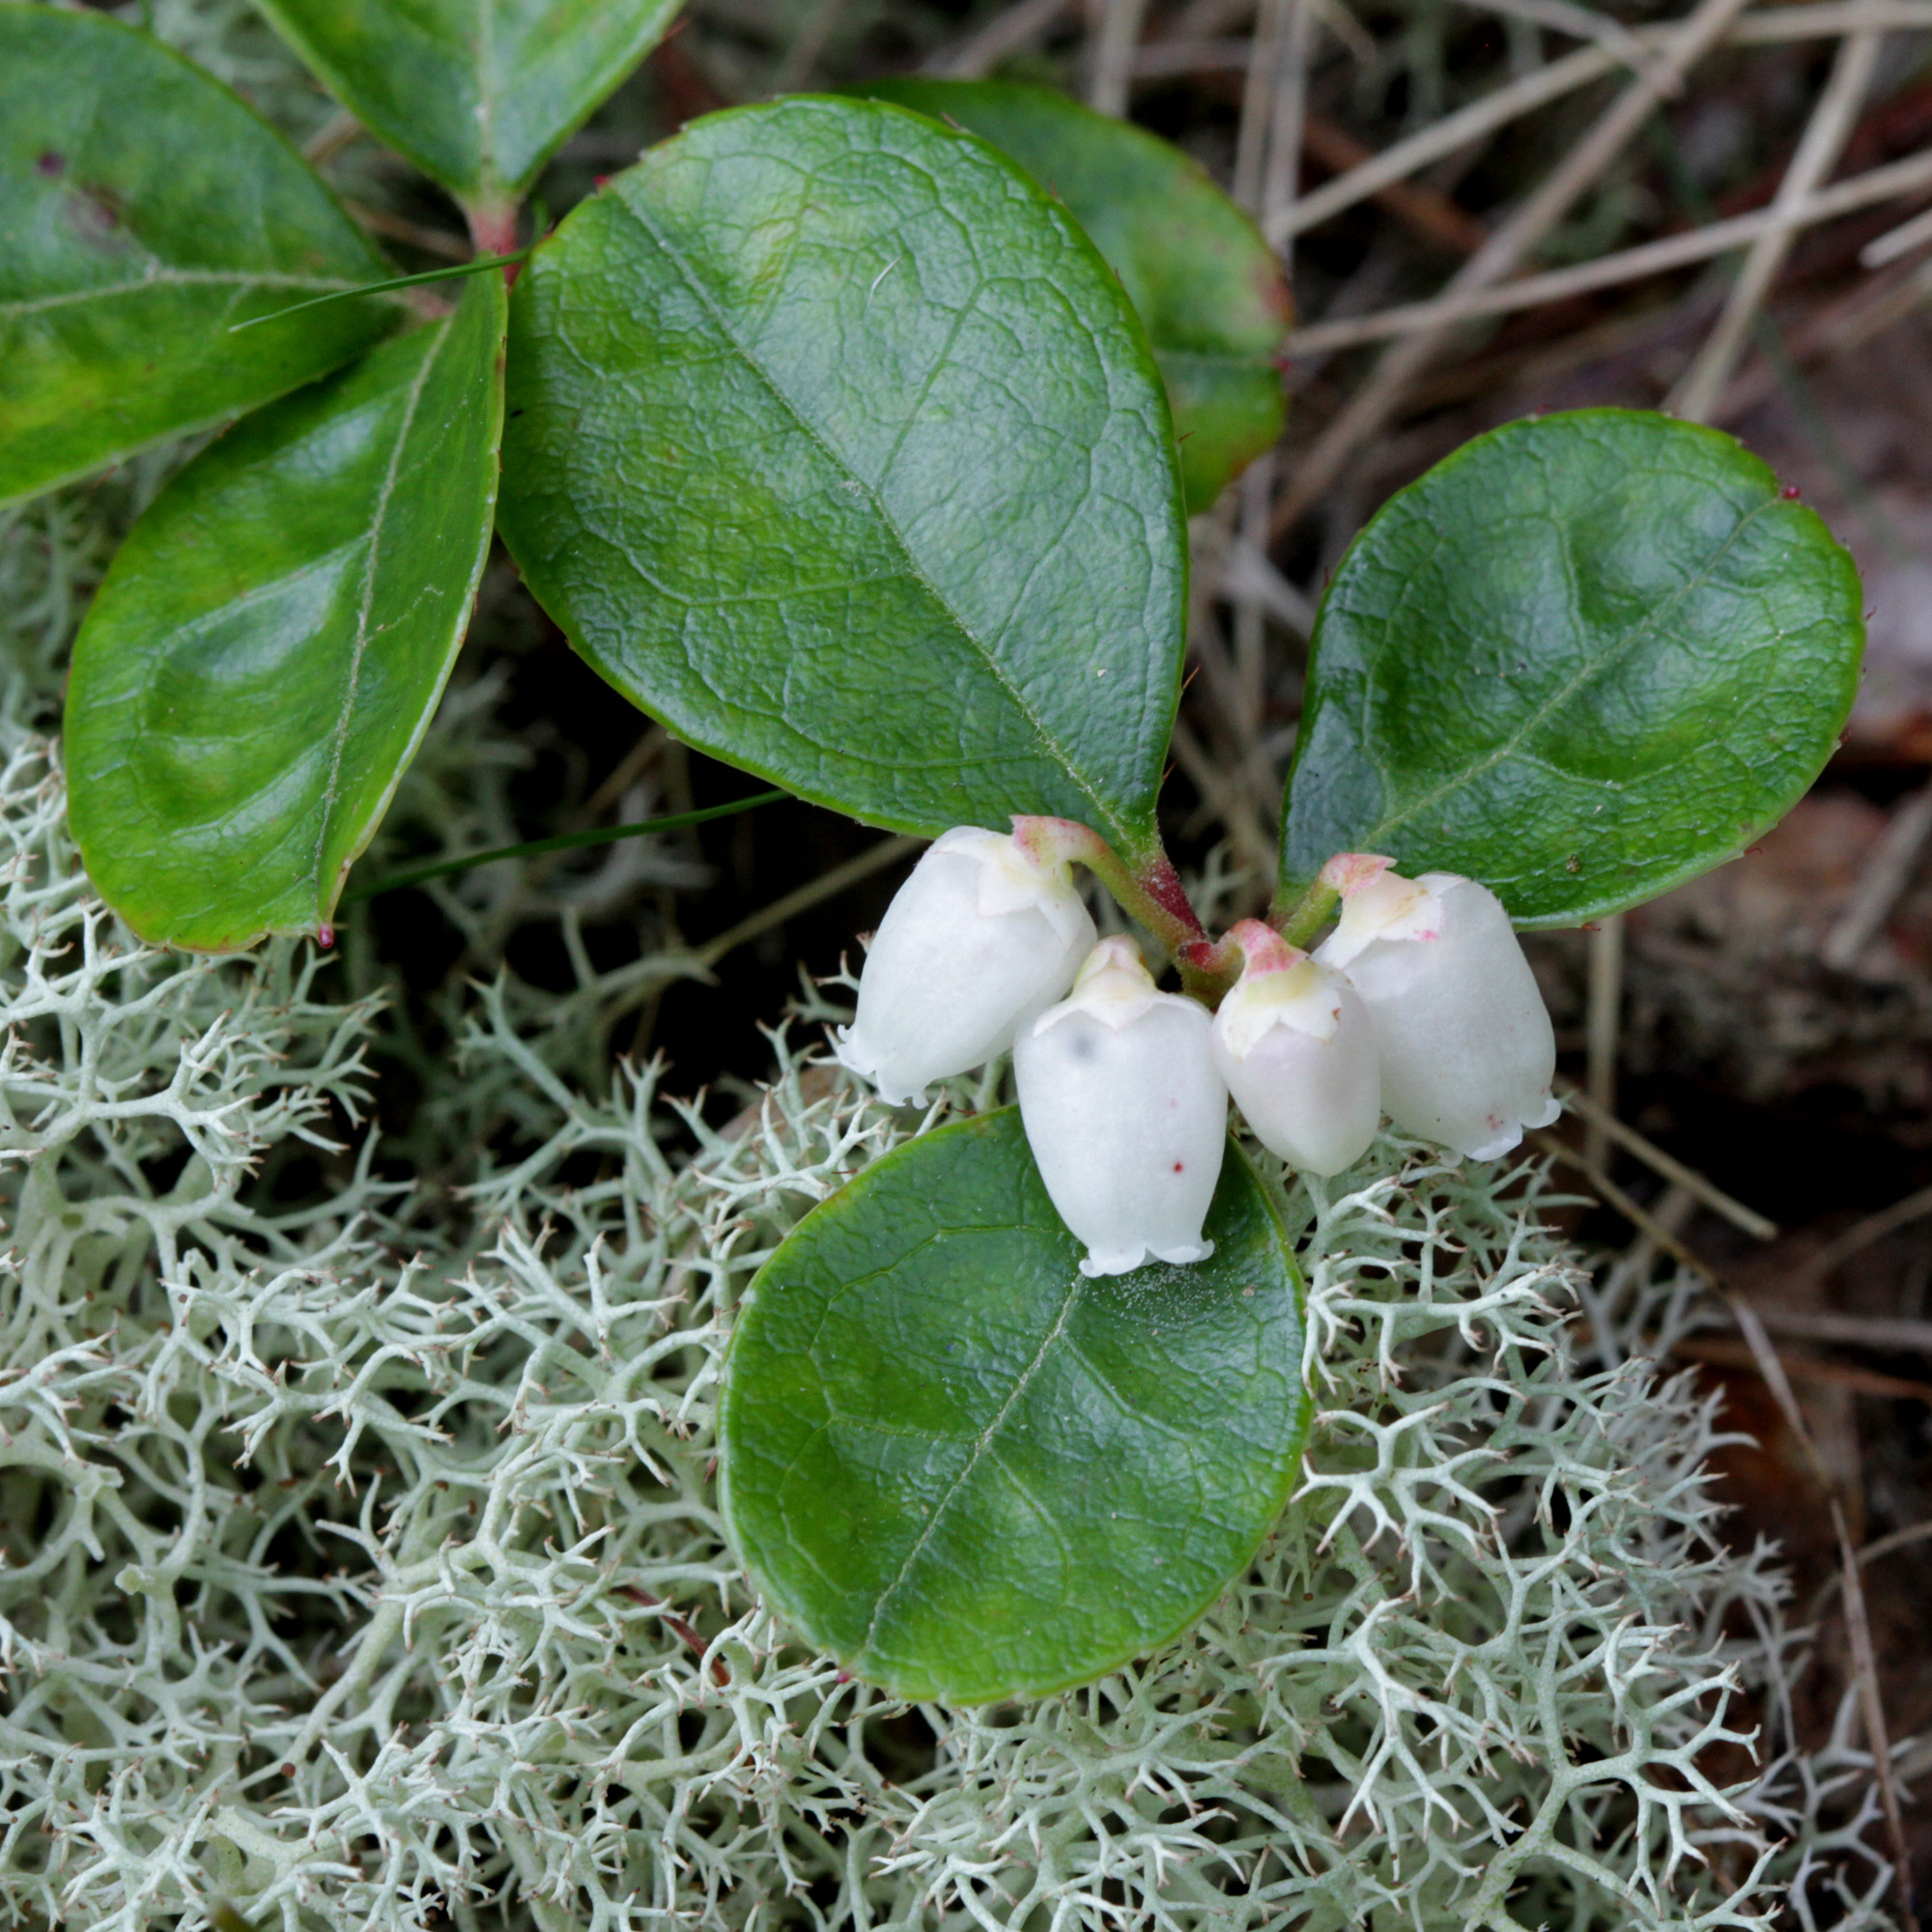 The Scientific Name is Gaultheria procumbens. You will likely hear them called Eastern Teaberry, Wintergreen, Checkerberry. This picture shows the Blossoms are white to pinkish, bell-shaped, developing io leaf axils.  Leaves are evergreen, ovate, leathery with a wintergreen scent. of Gaultheria procumbens